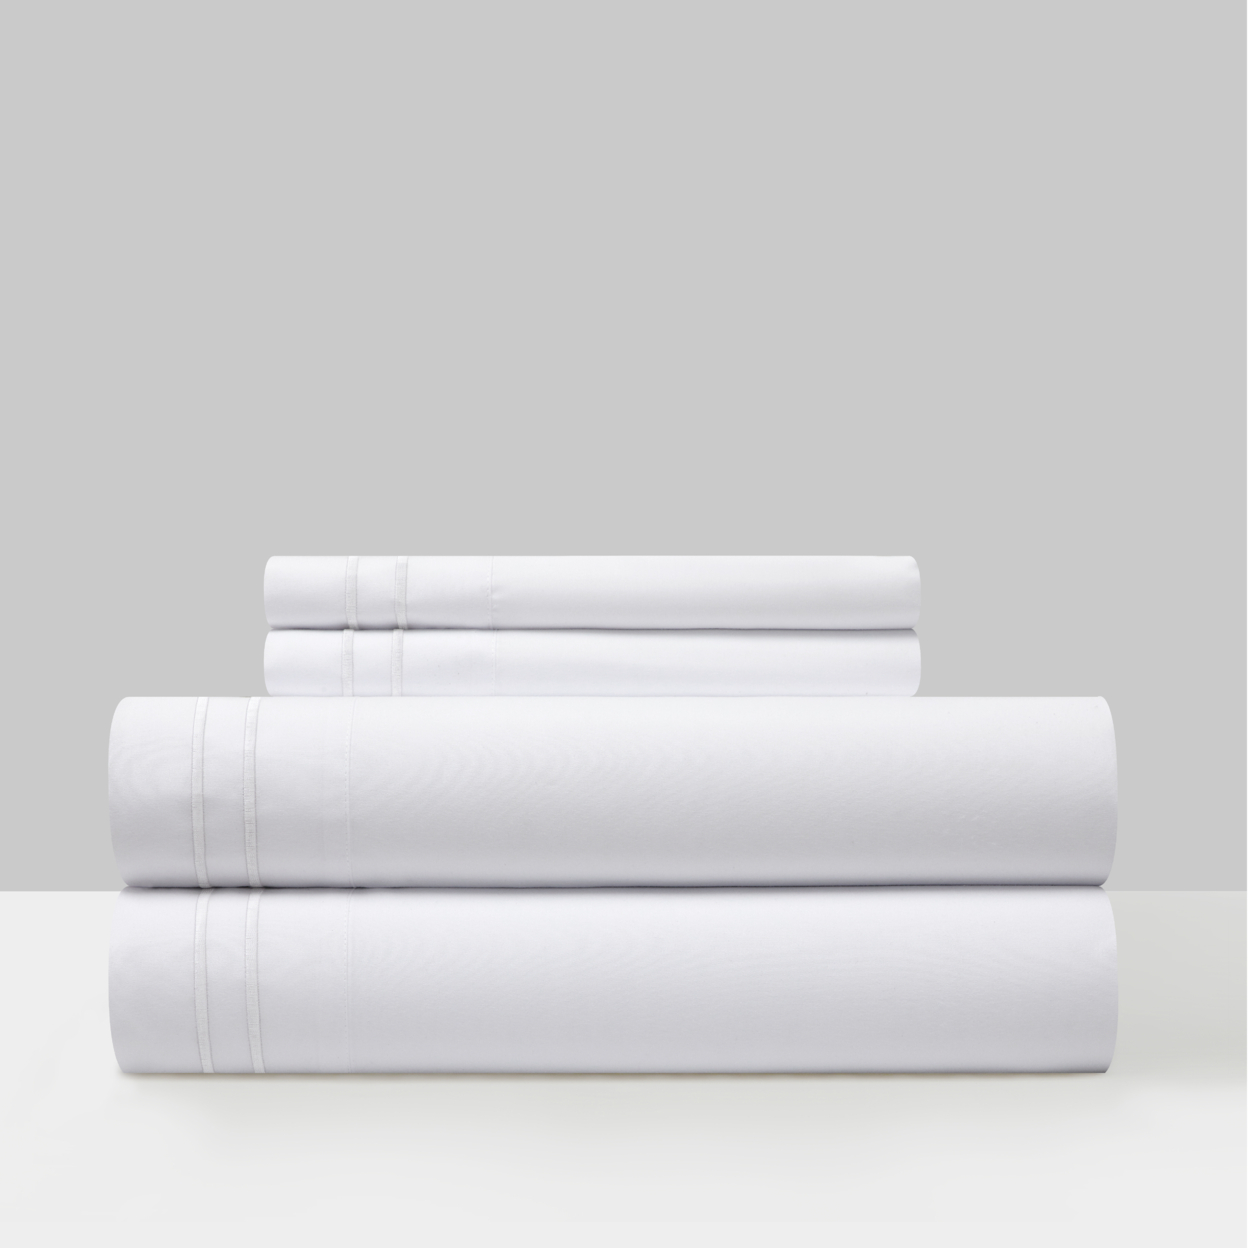 Vina 3 Or 4 Piece Sheet Set Solid Color With Dual Stripe Embroidery - Grey, King